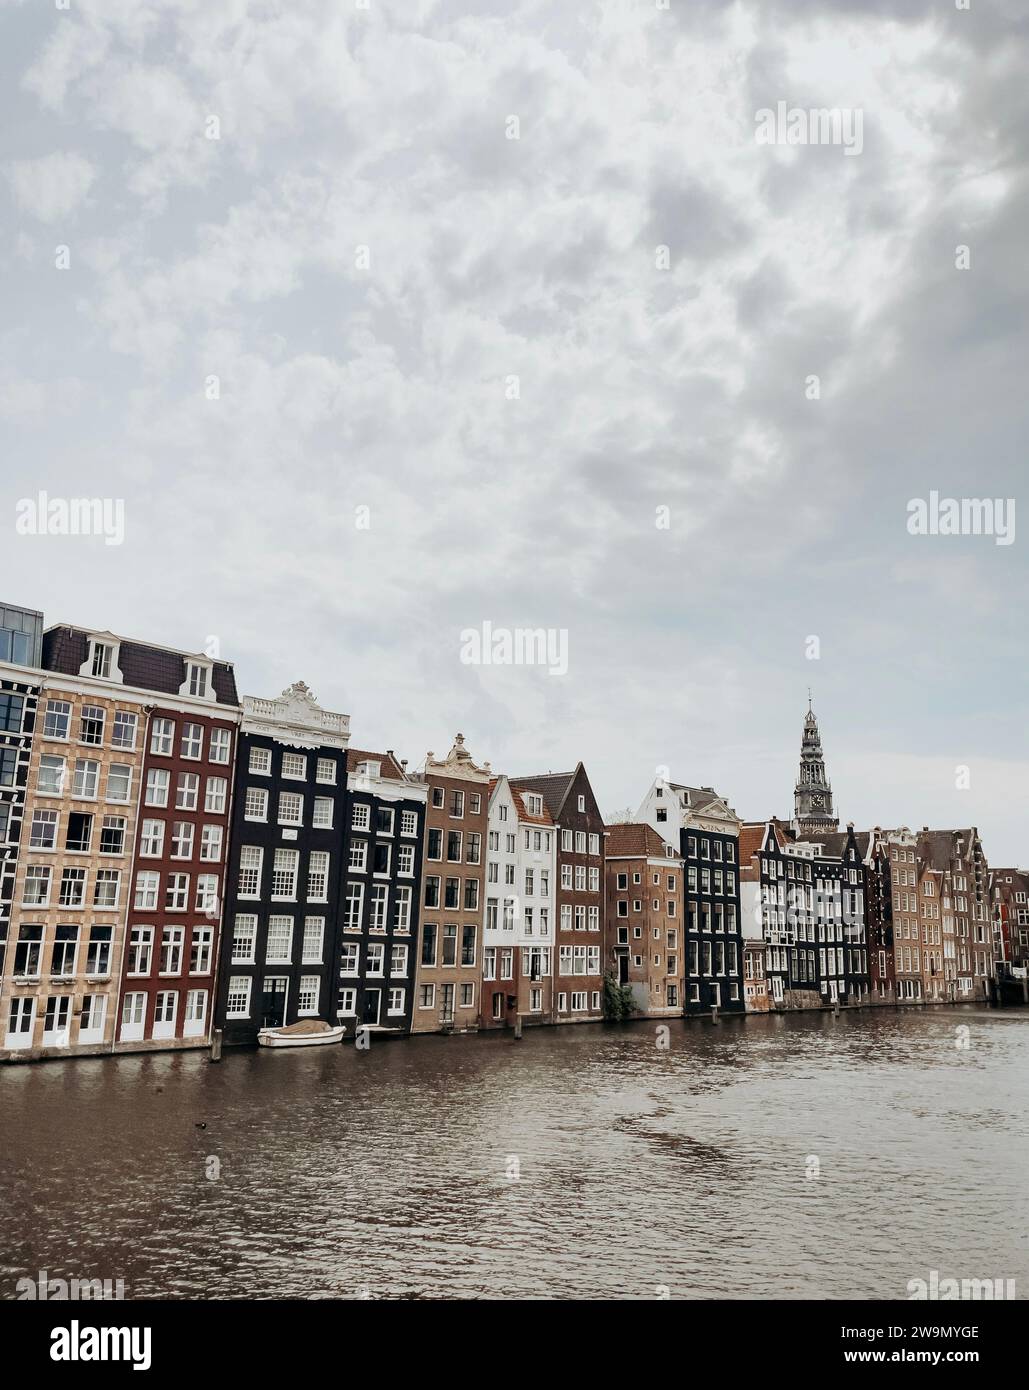 Traditional waterfront houses along a canal, Amsterdam, Netherlands Stock Photo